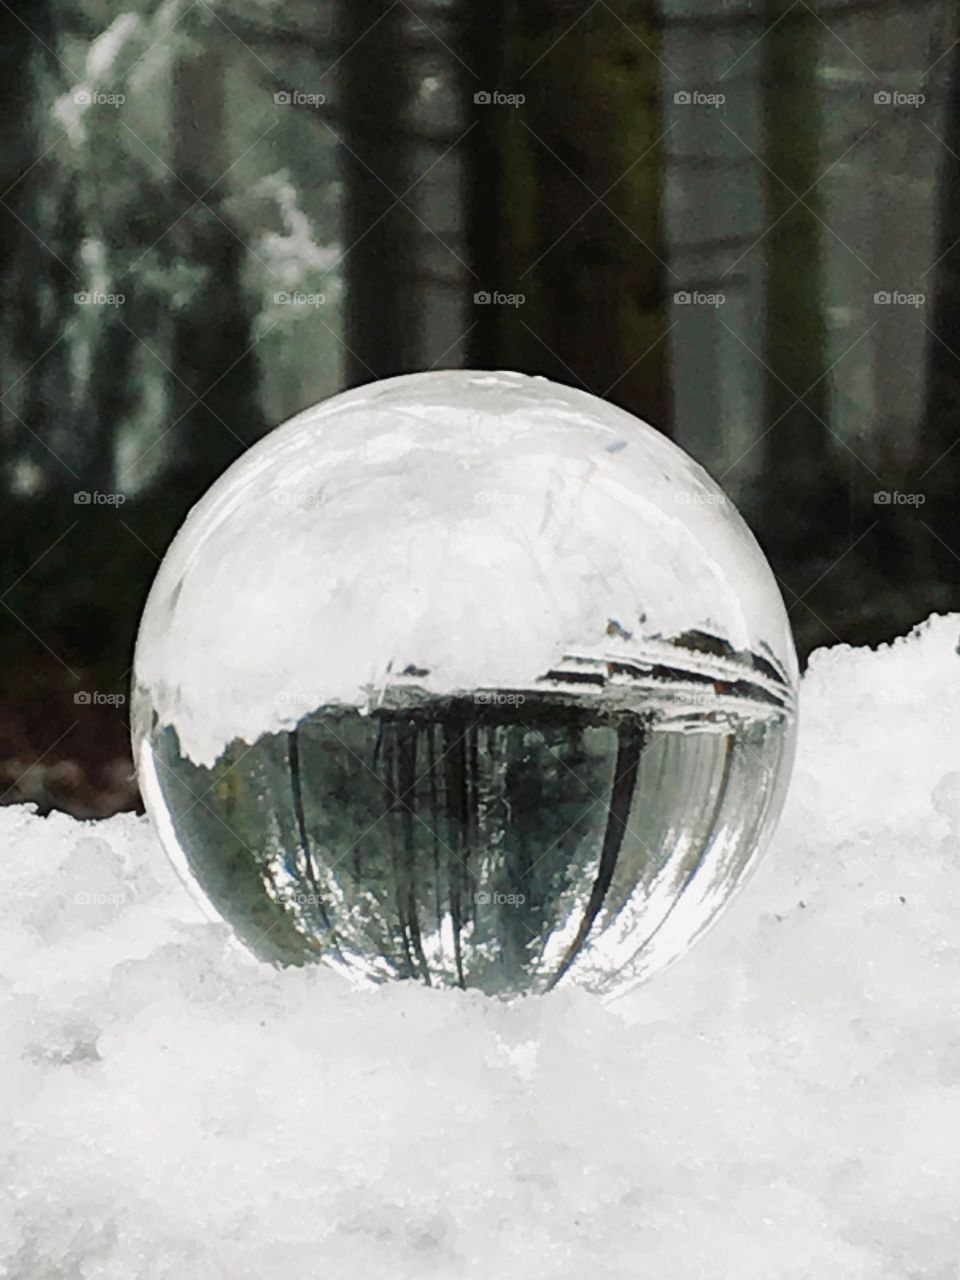 Crystal ball photography. Picture taken in the Zonian Forest, Brussels, Begium. Snowy day in winter.